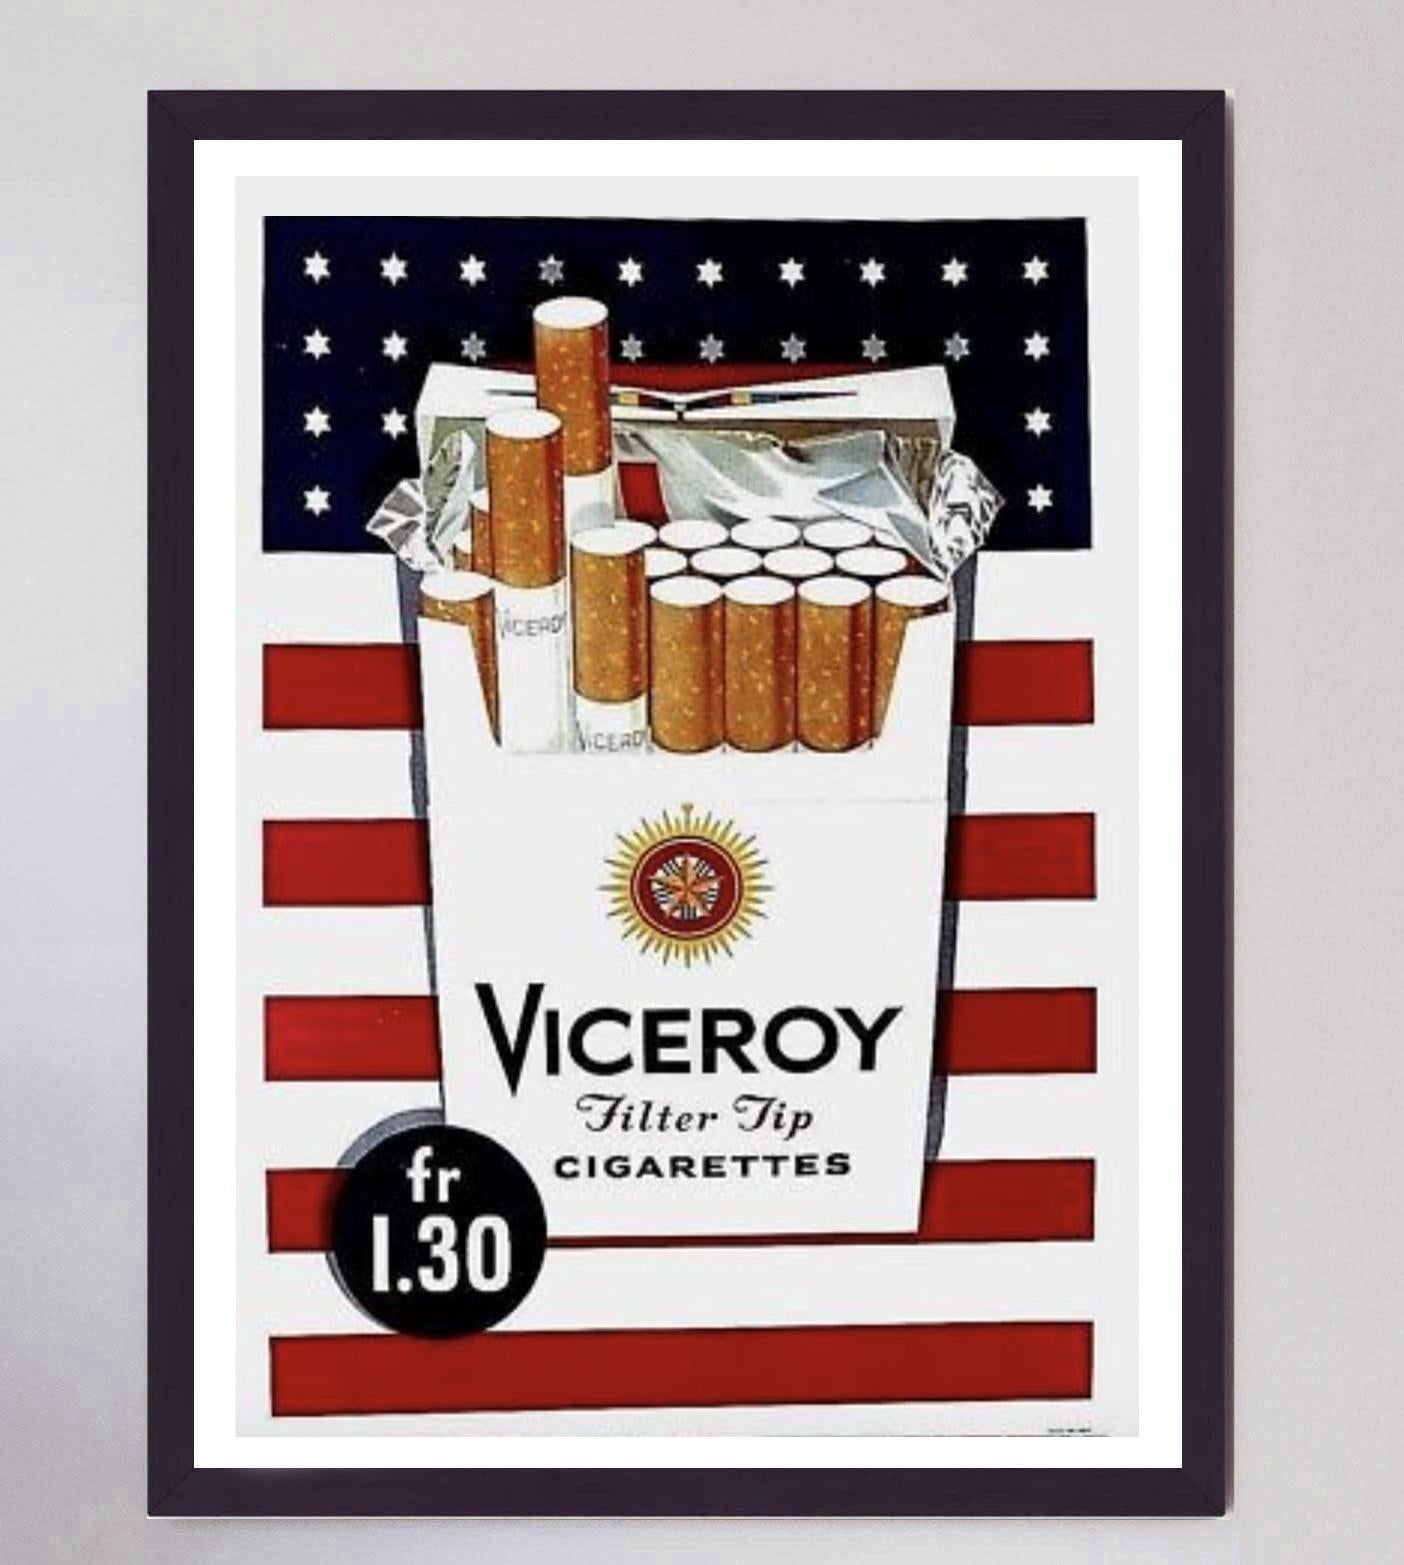 viceroy cigarettes price